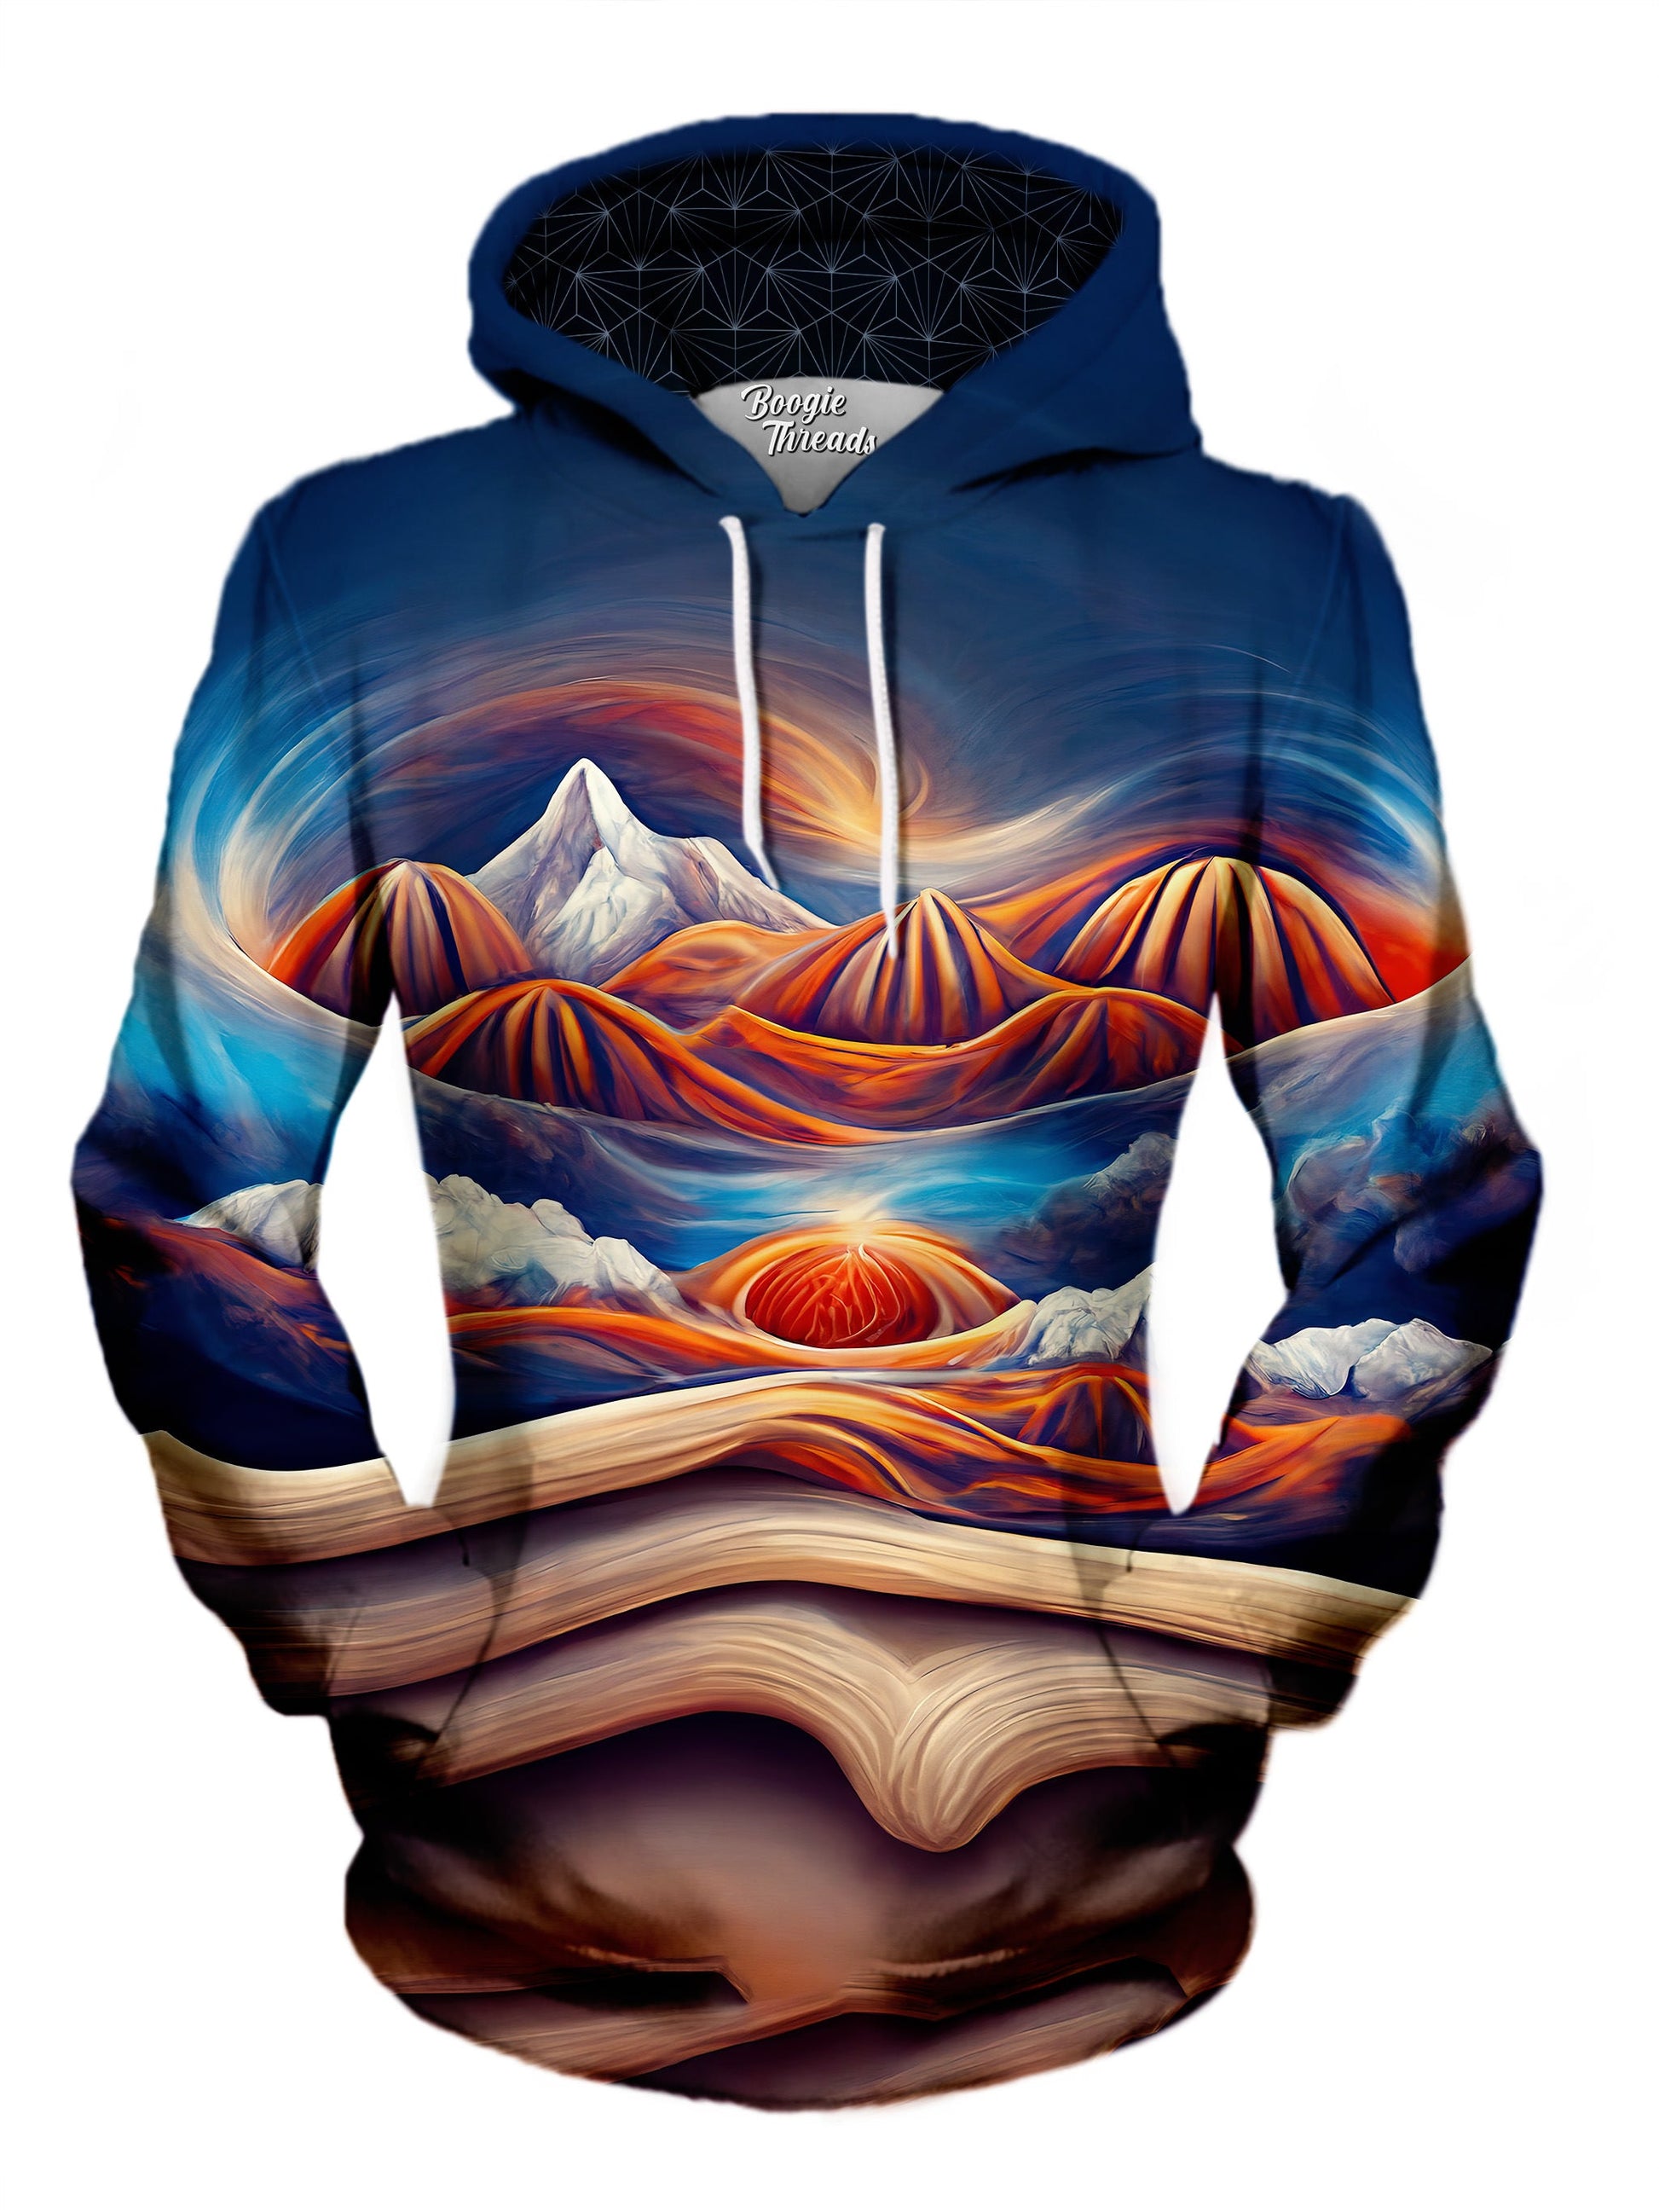 Exalted Eternity Unisex Pullover Hoodie - EDM Festival Clothing - Boogie Threads